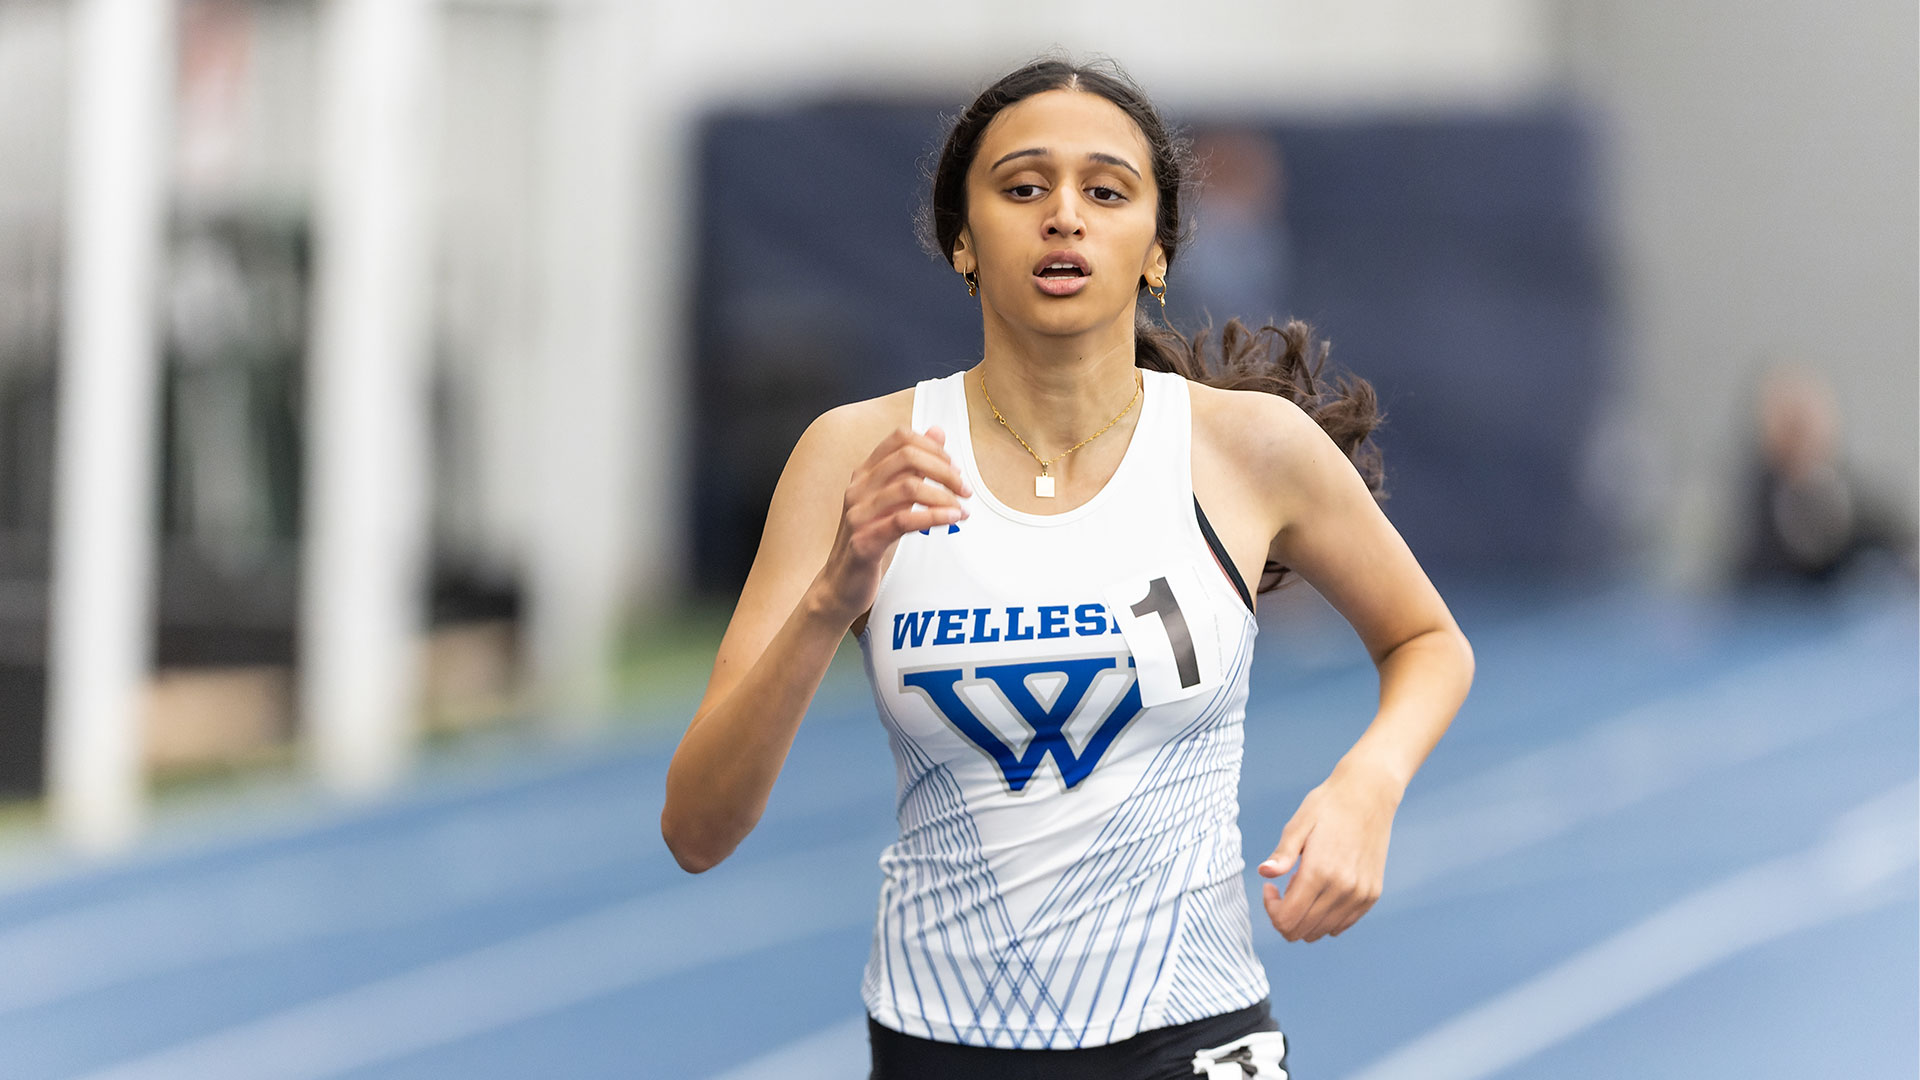 Wellesley Track and Field Competes in Tufts Cupid Challenge